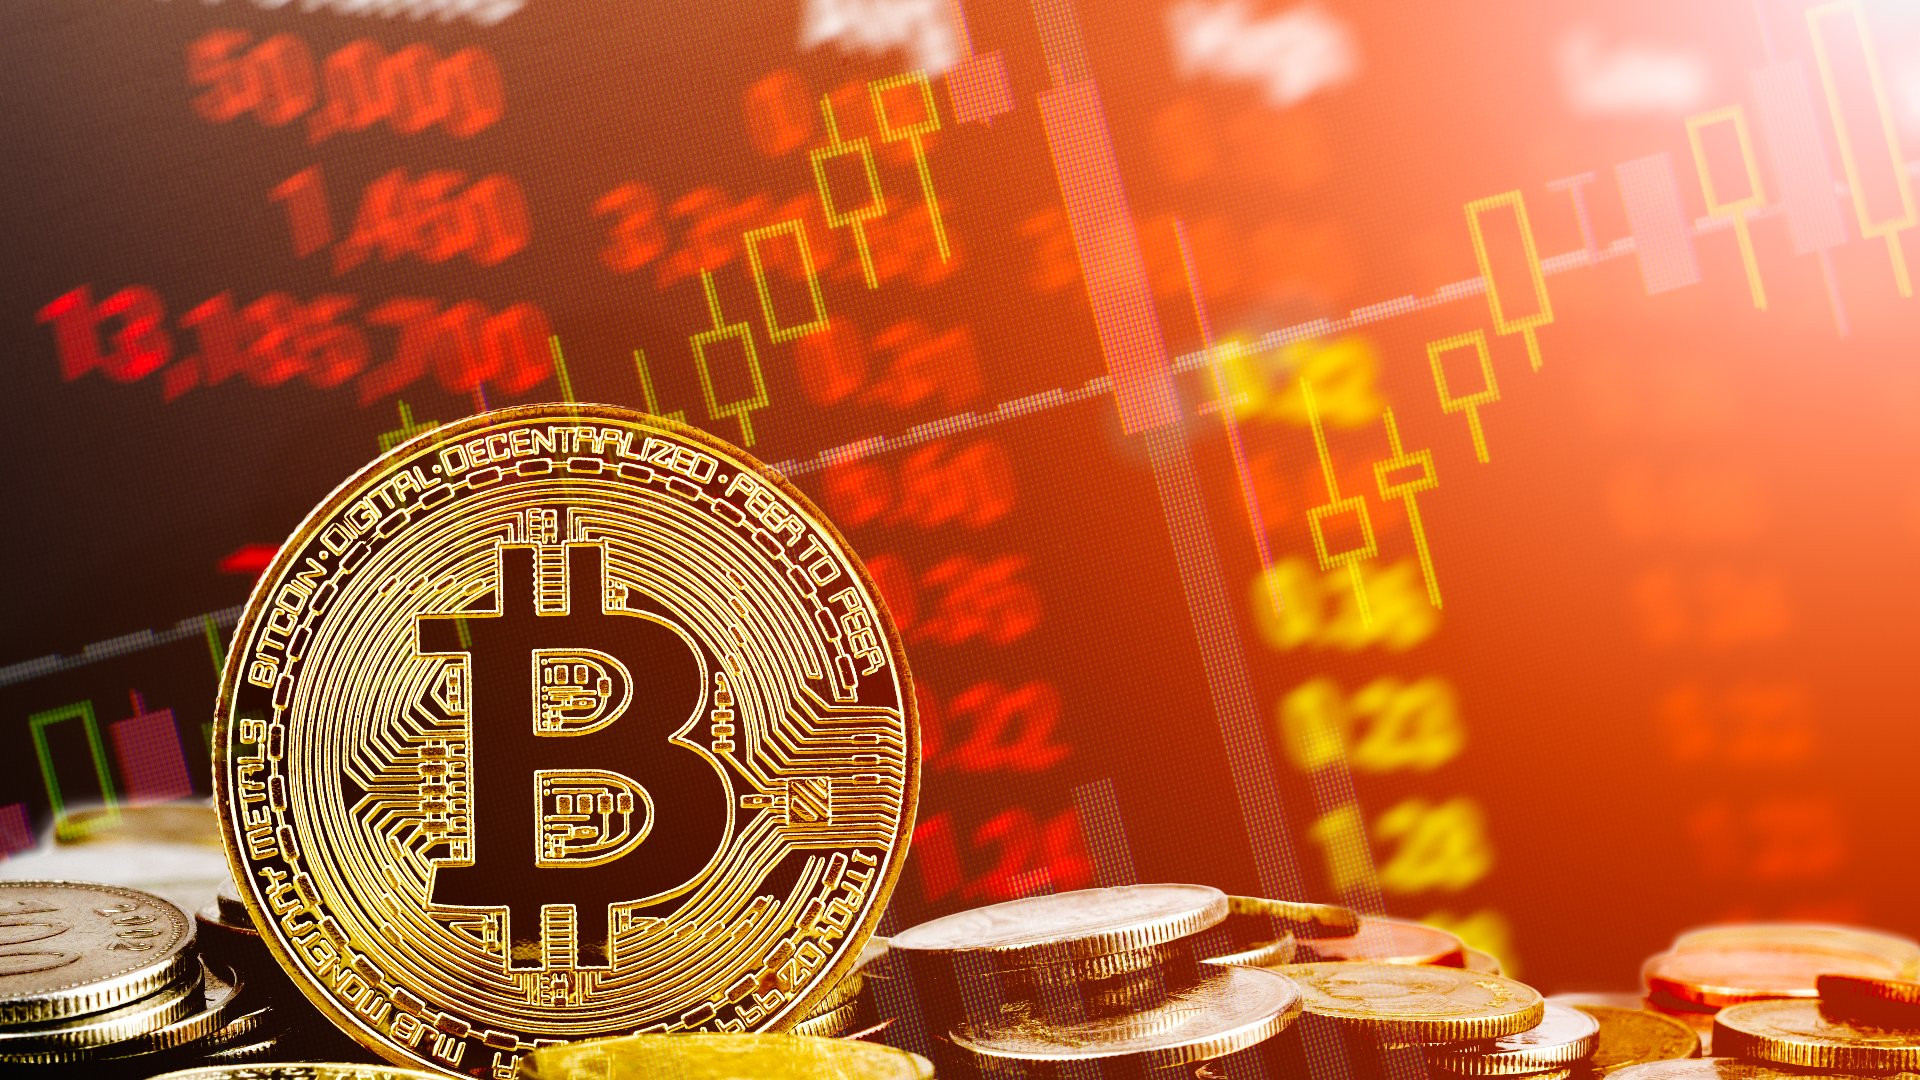 Bitcoin has historically exhibited exponential gains during bull cycles, although each cycle has also seen significant drawdowns. The current upward momentum is driven by the anticipated approval and influence of spot ETFs, which are expected to bring more investors into the market. New inflows haven`t even started yet “Bitcoin`s upward